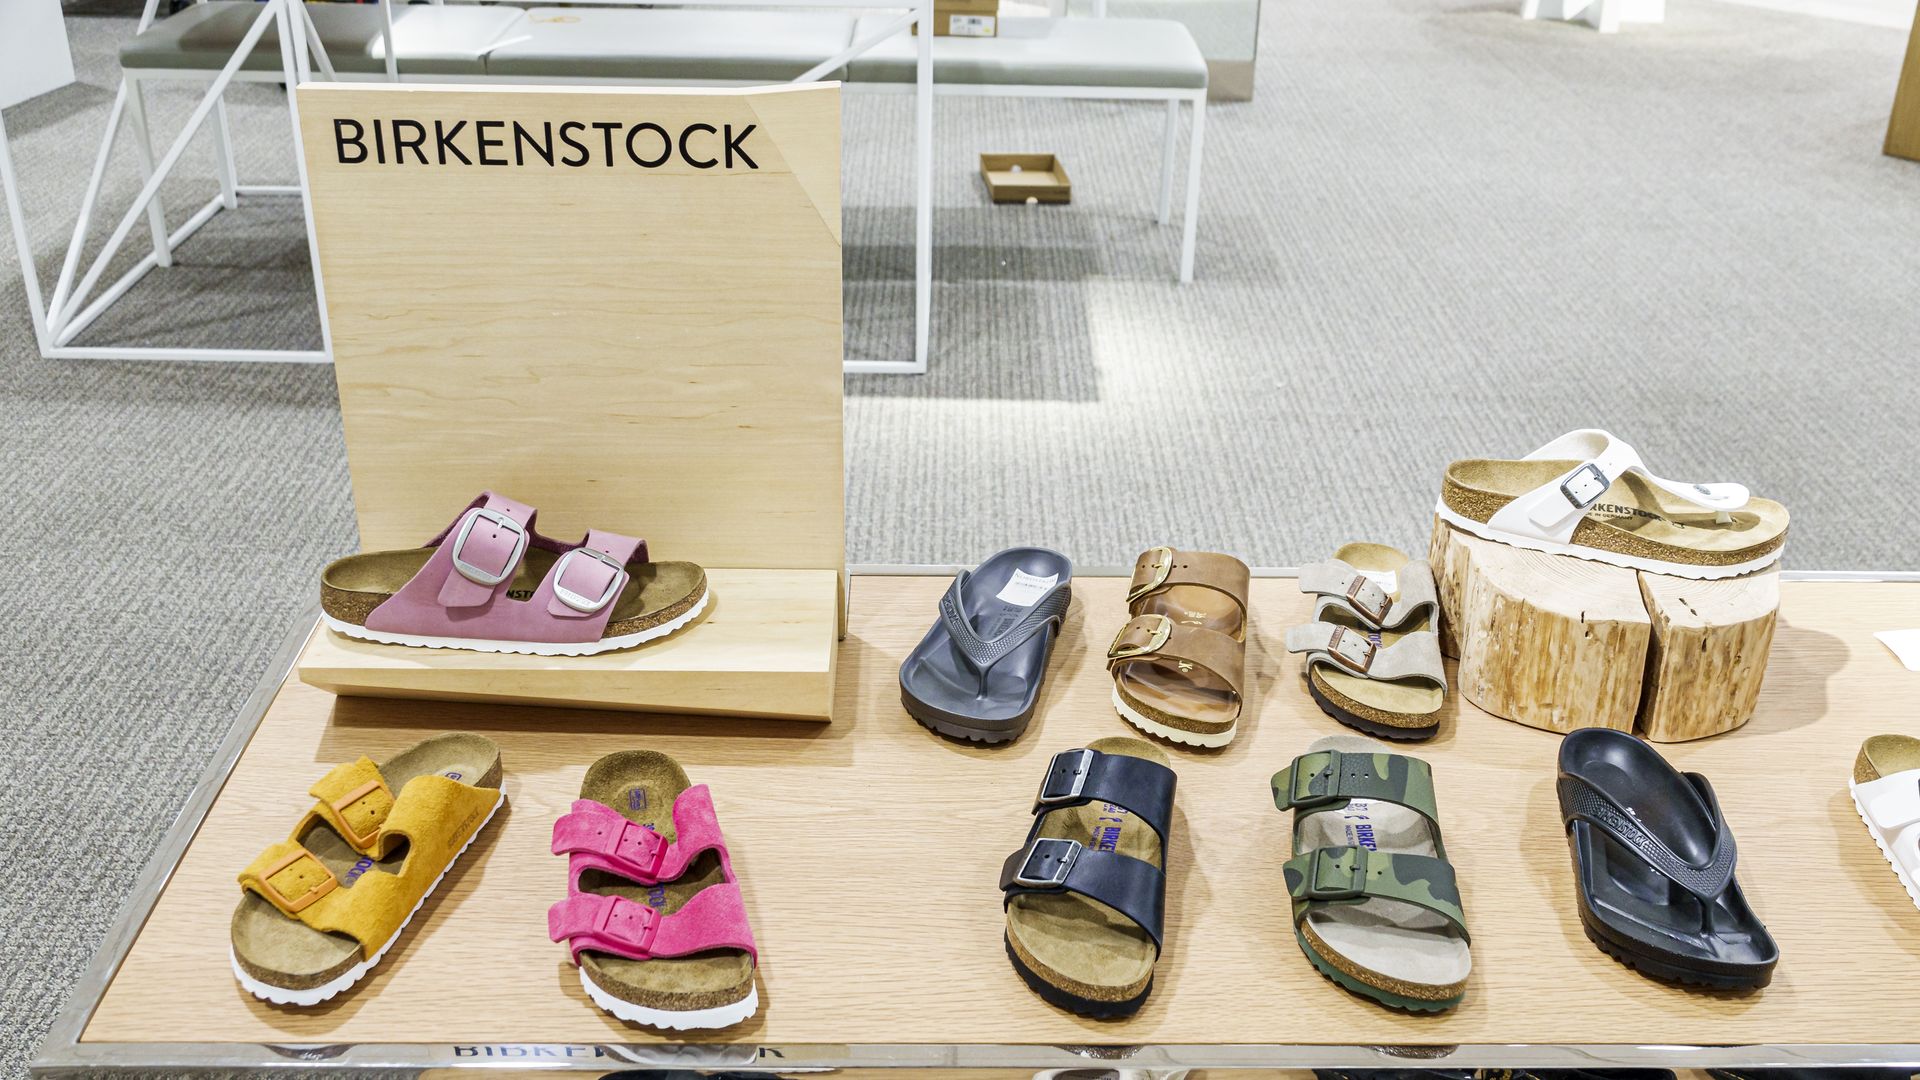 A row of different colored Birkenstock sandals in a display case